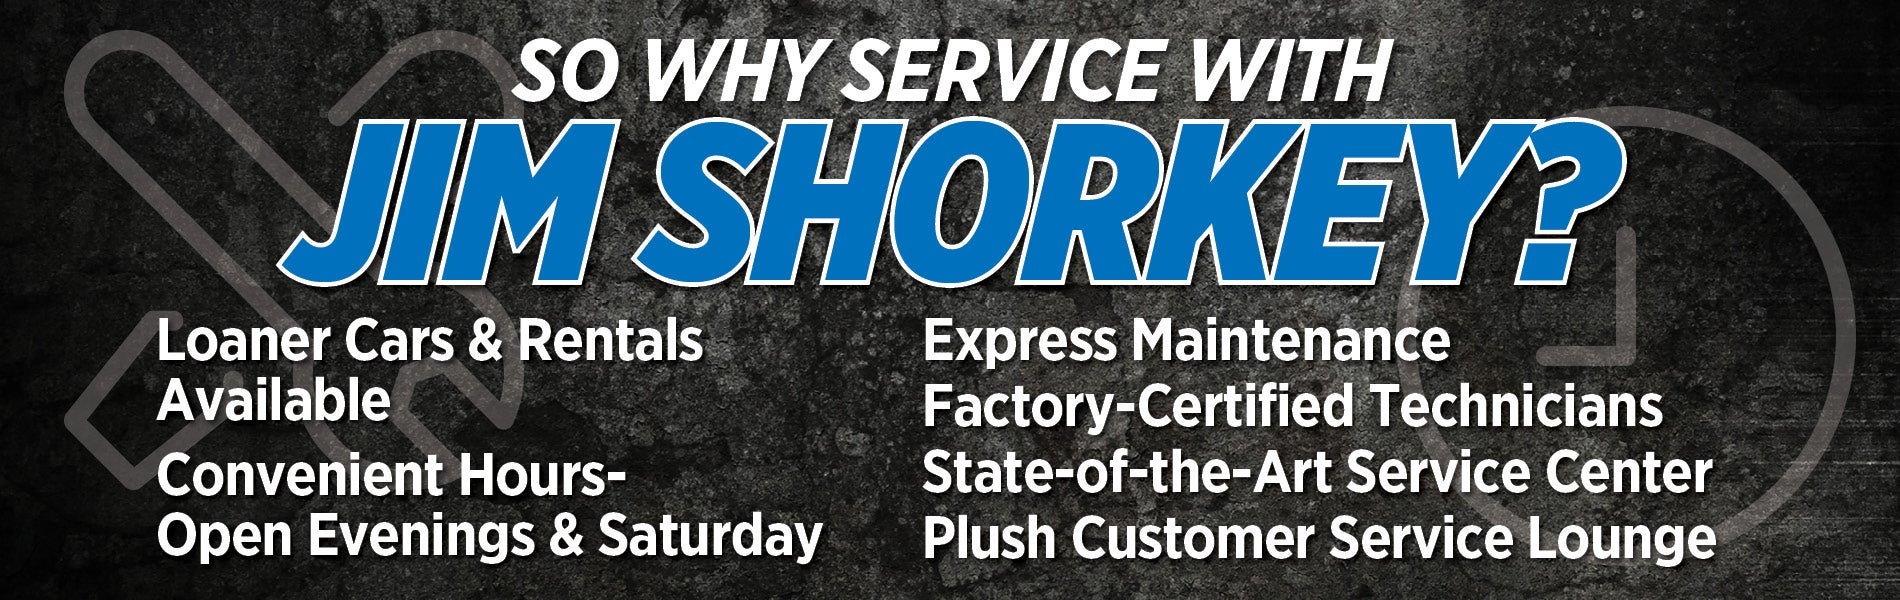 Why service with Jim Shorkey?